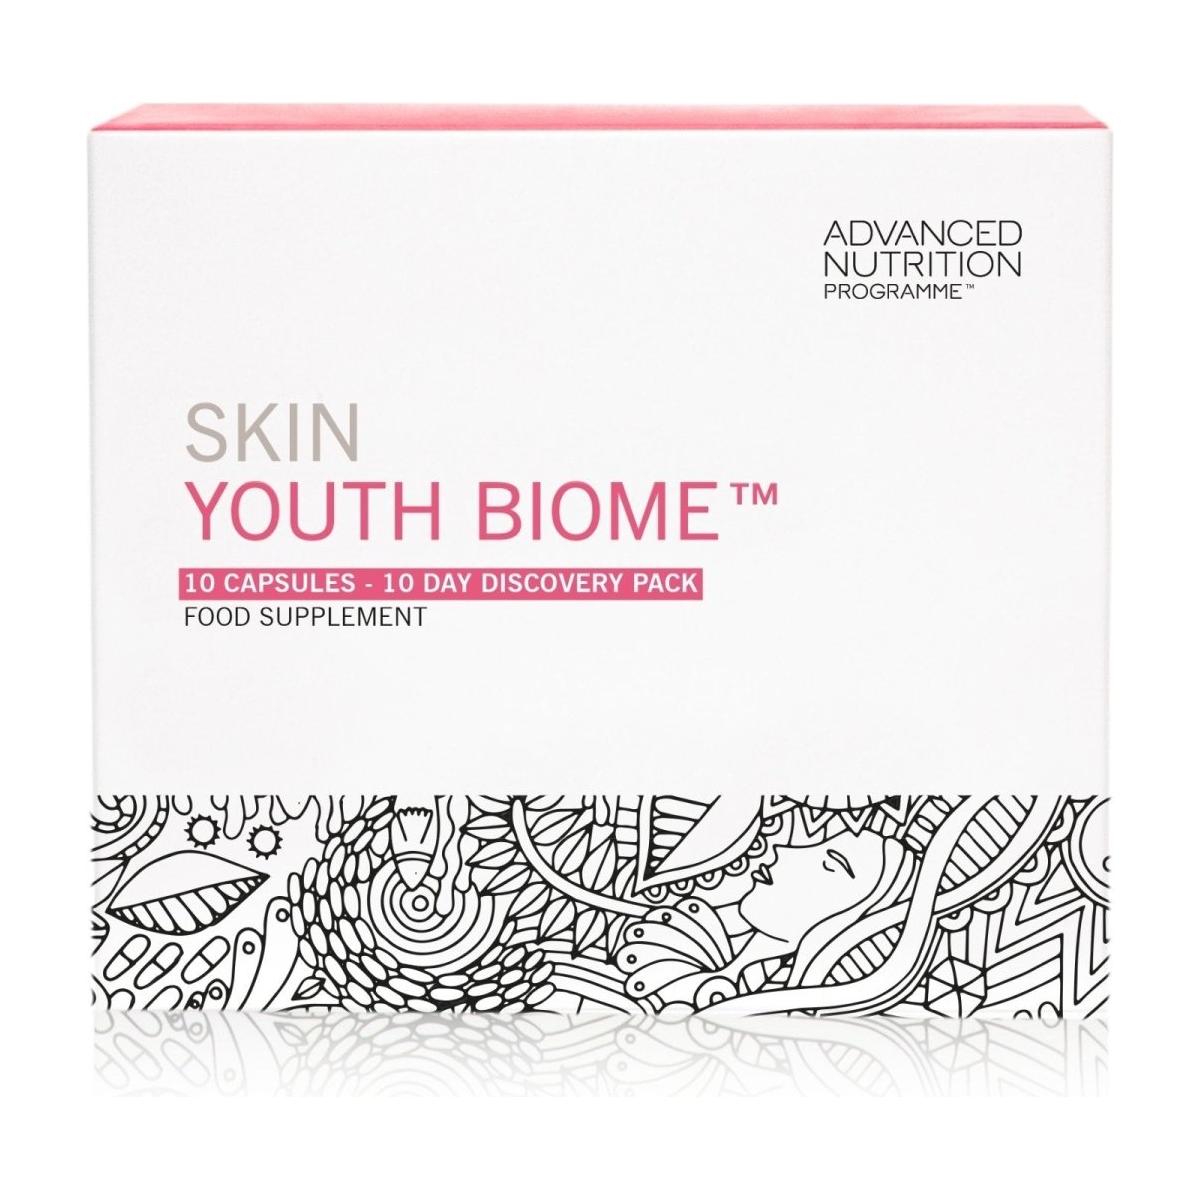 Advanced Nutrition Programme | Skin Youth Biome | 10 Day Discovery Pack - DG International Ventures Limited